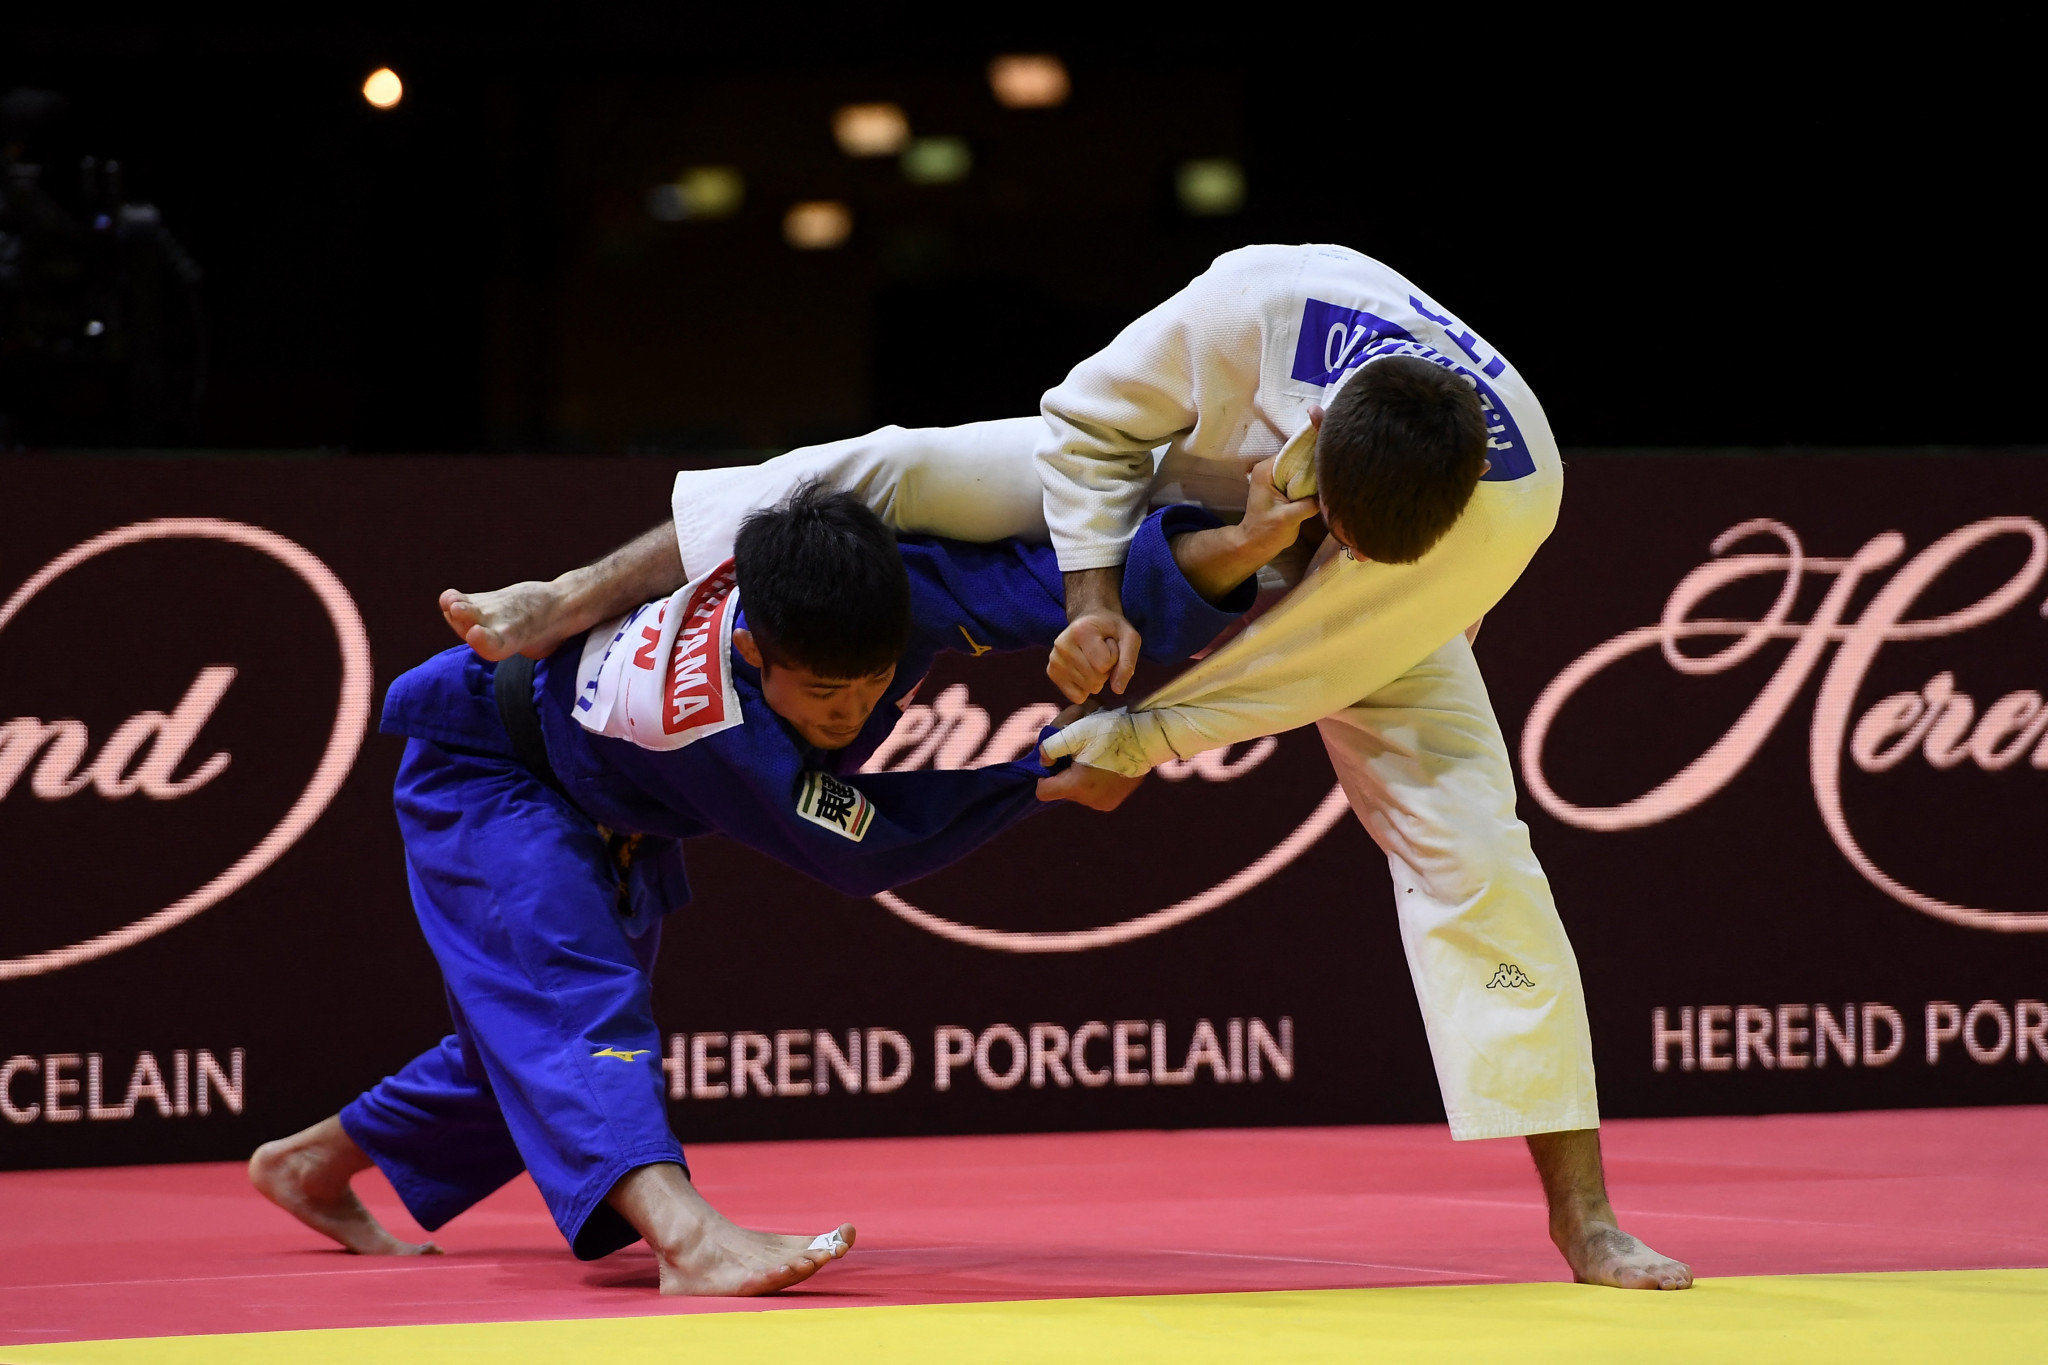 insidethegames is reporting LIVE on the IJF World Championships